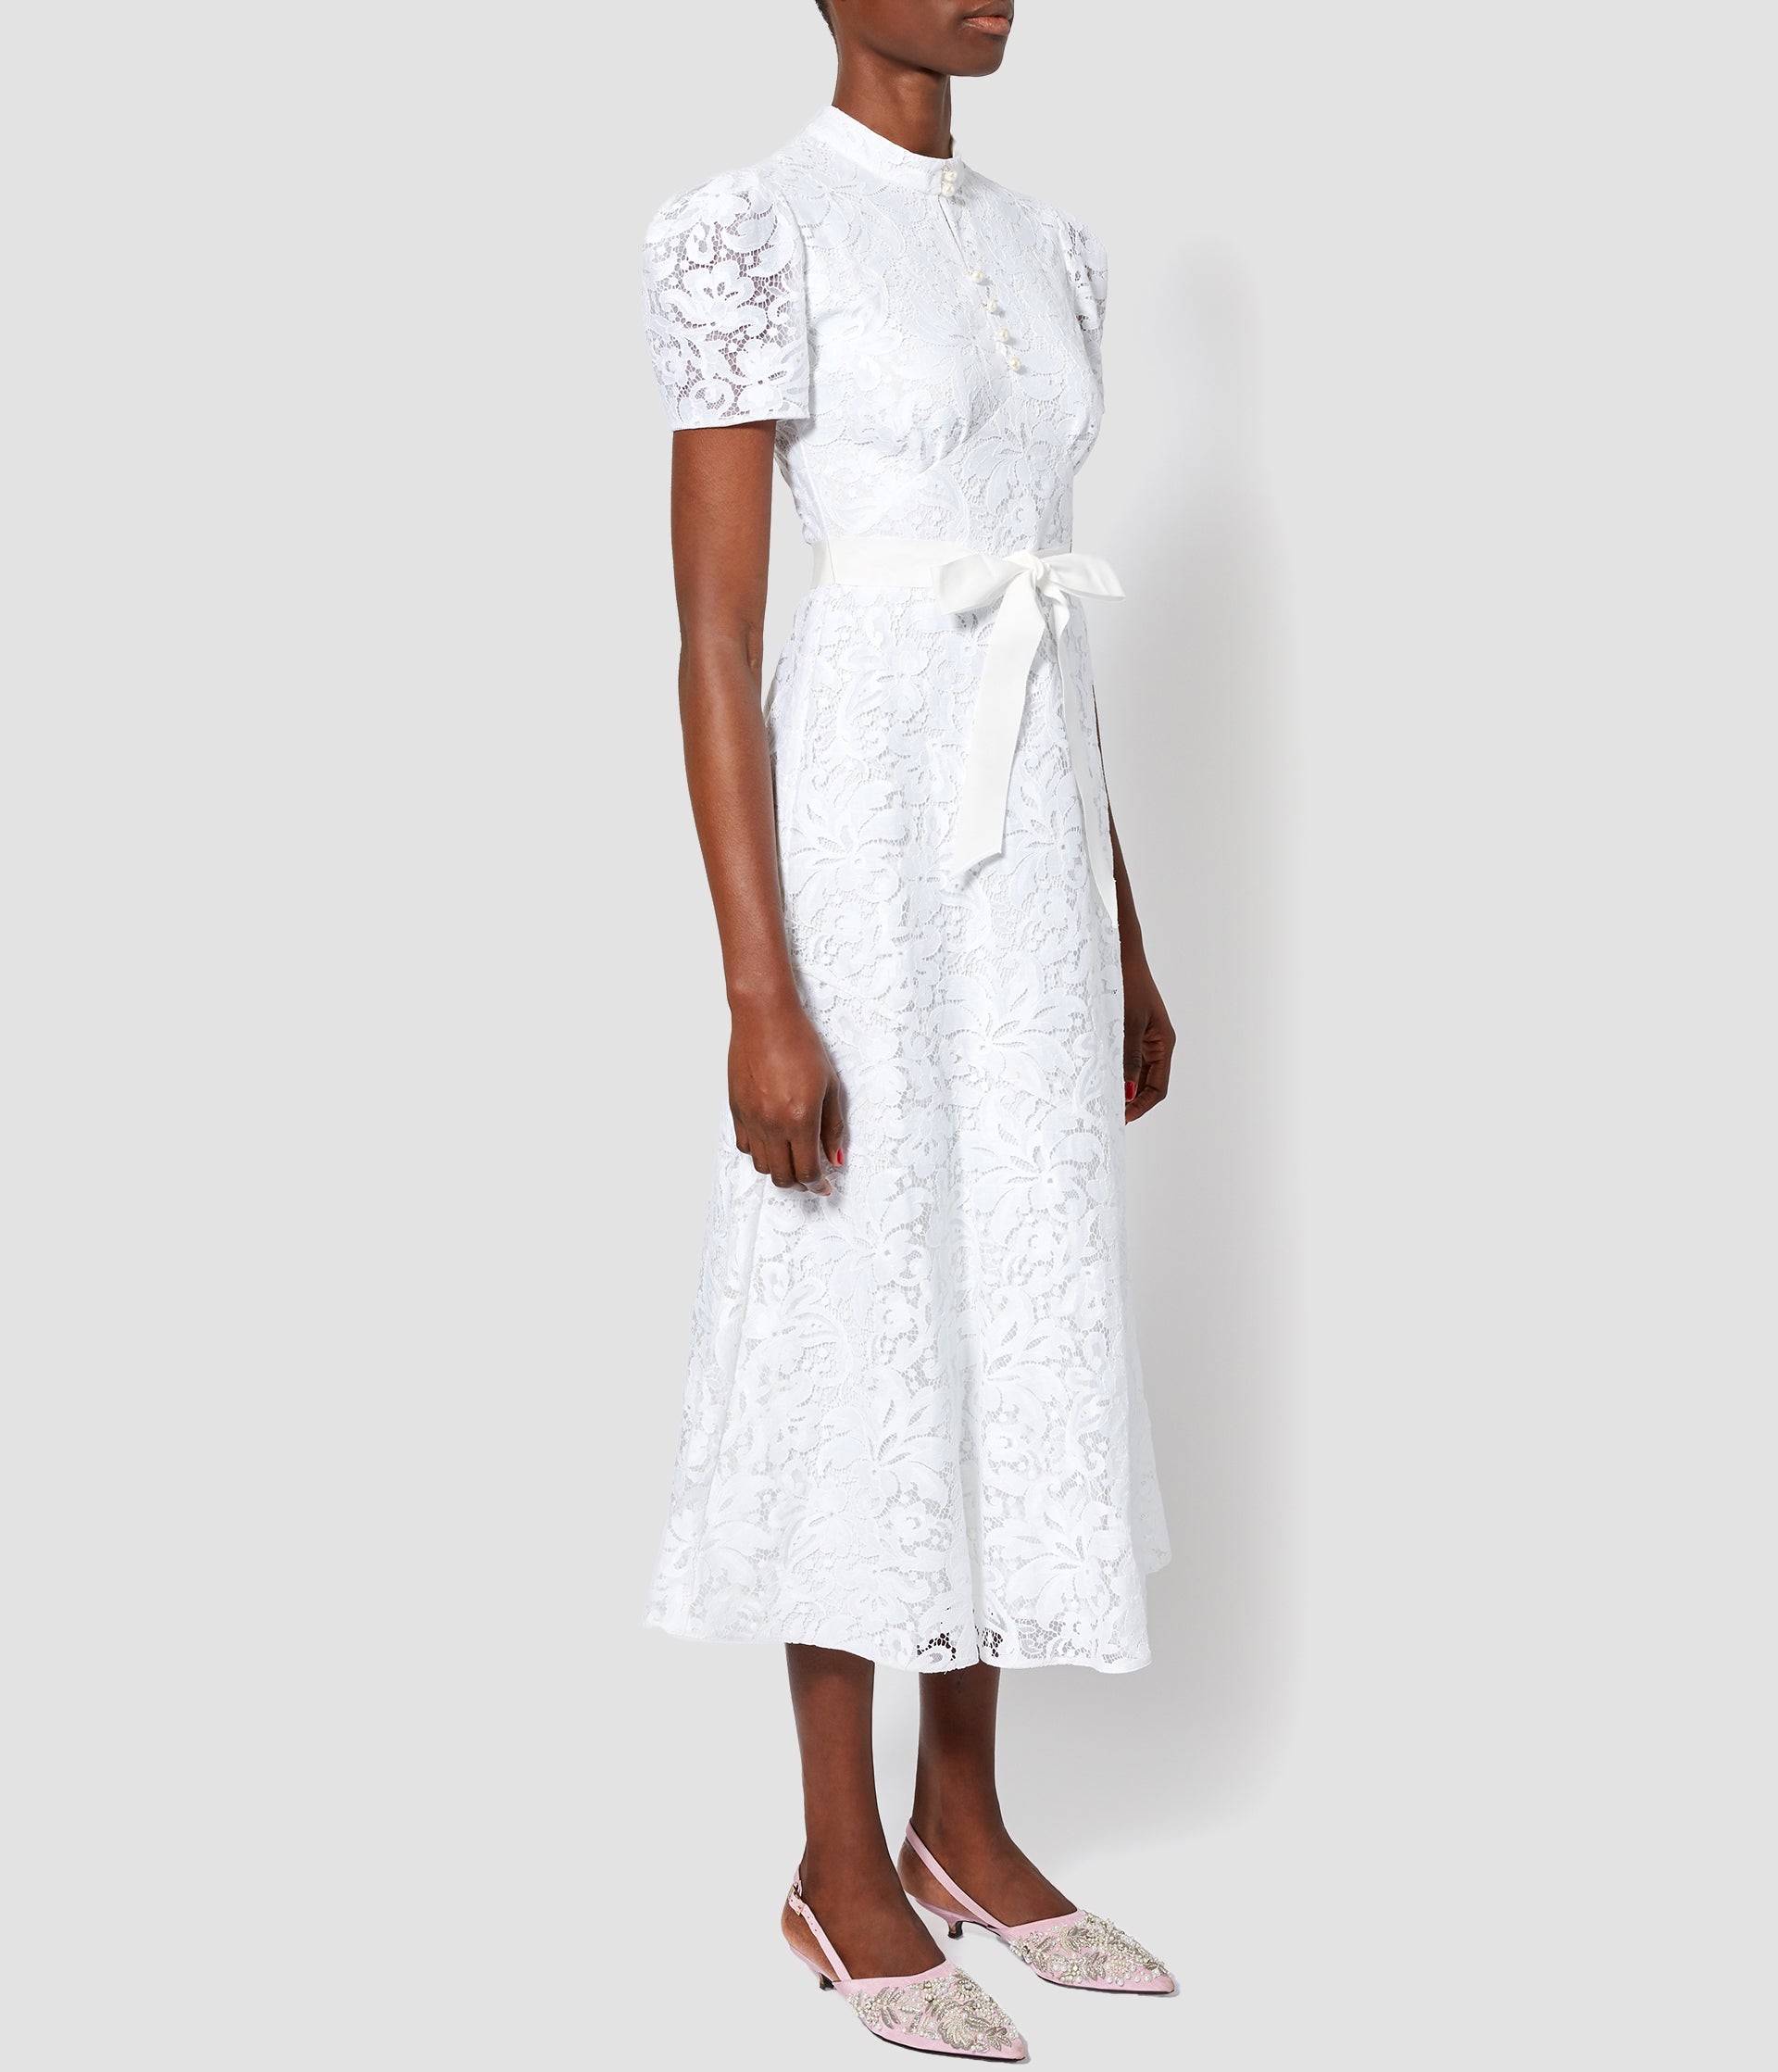 Part of the ERDEM white collection, this white lace puff sleeve dress is the perfect addition to a wedding wardrobe for rehearsal dinners or a more casual ceremony. 